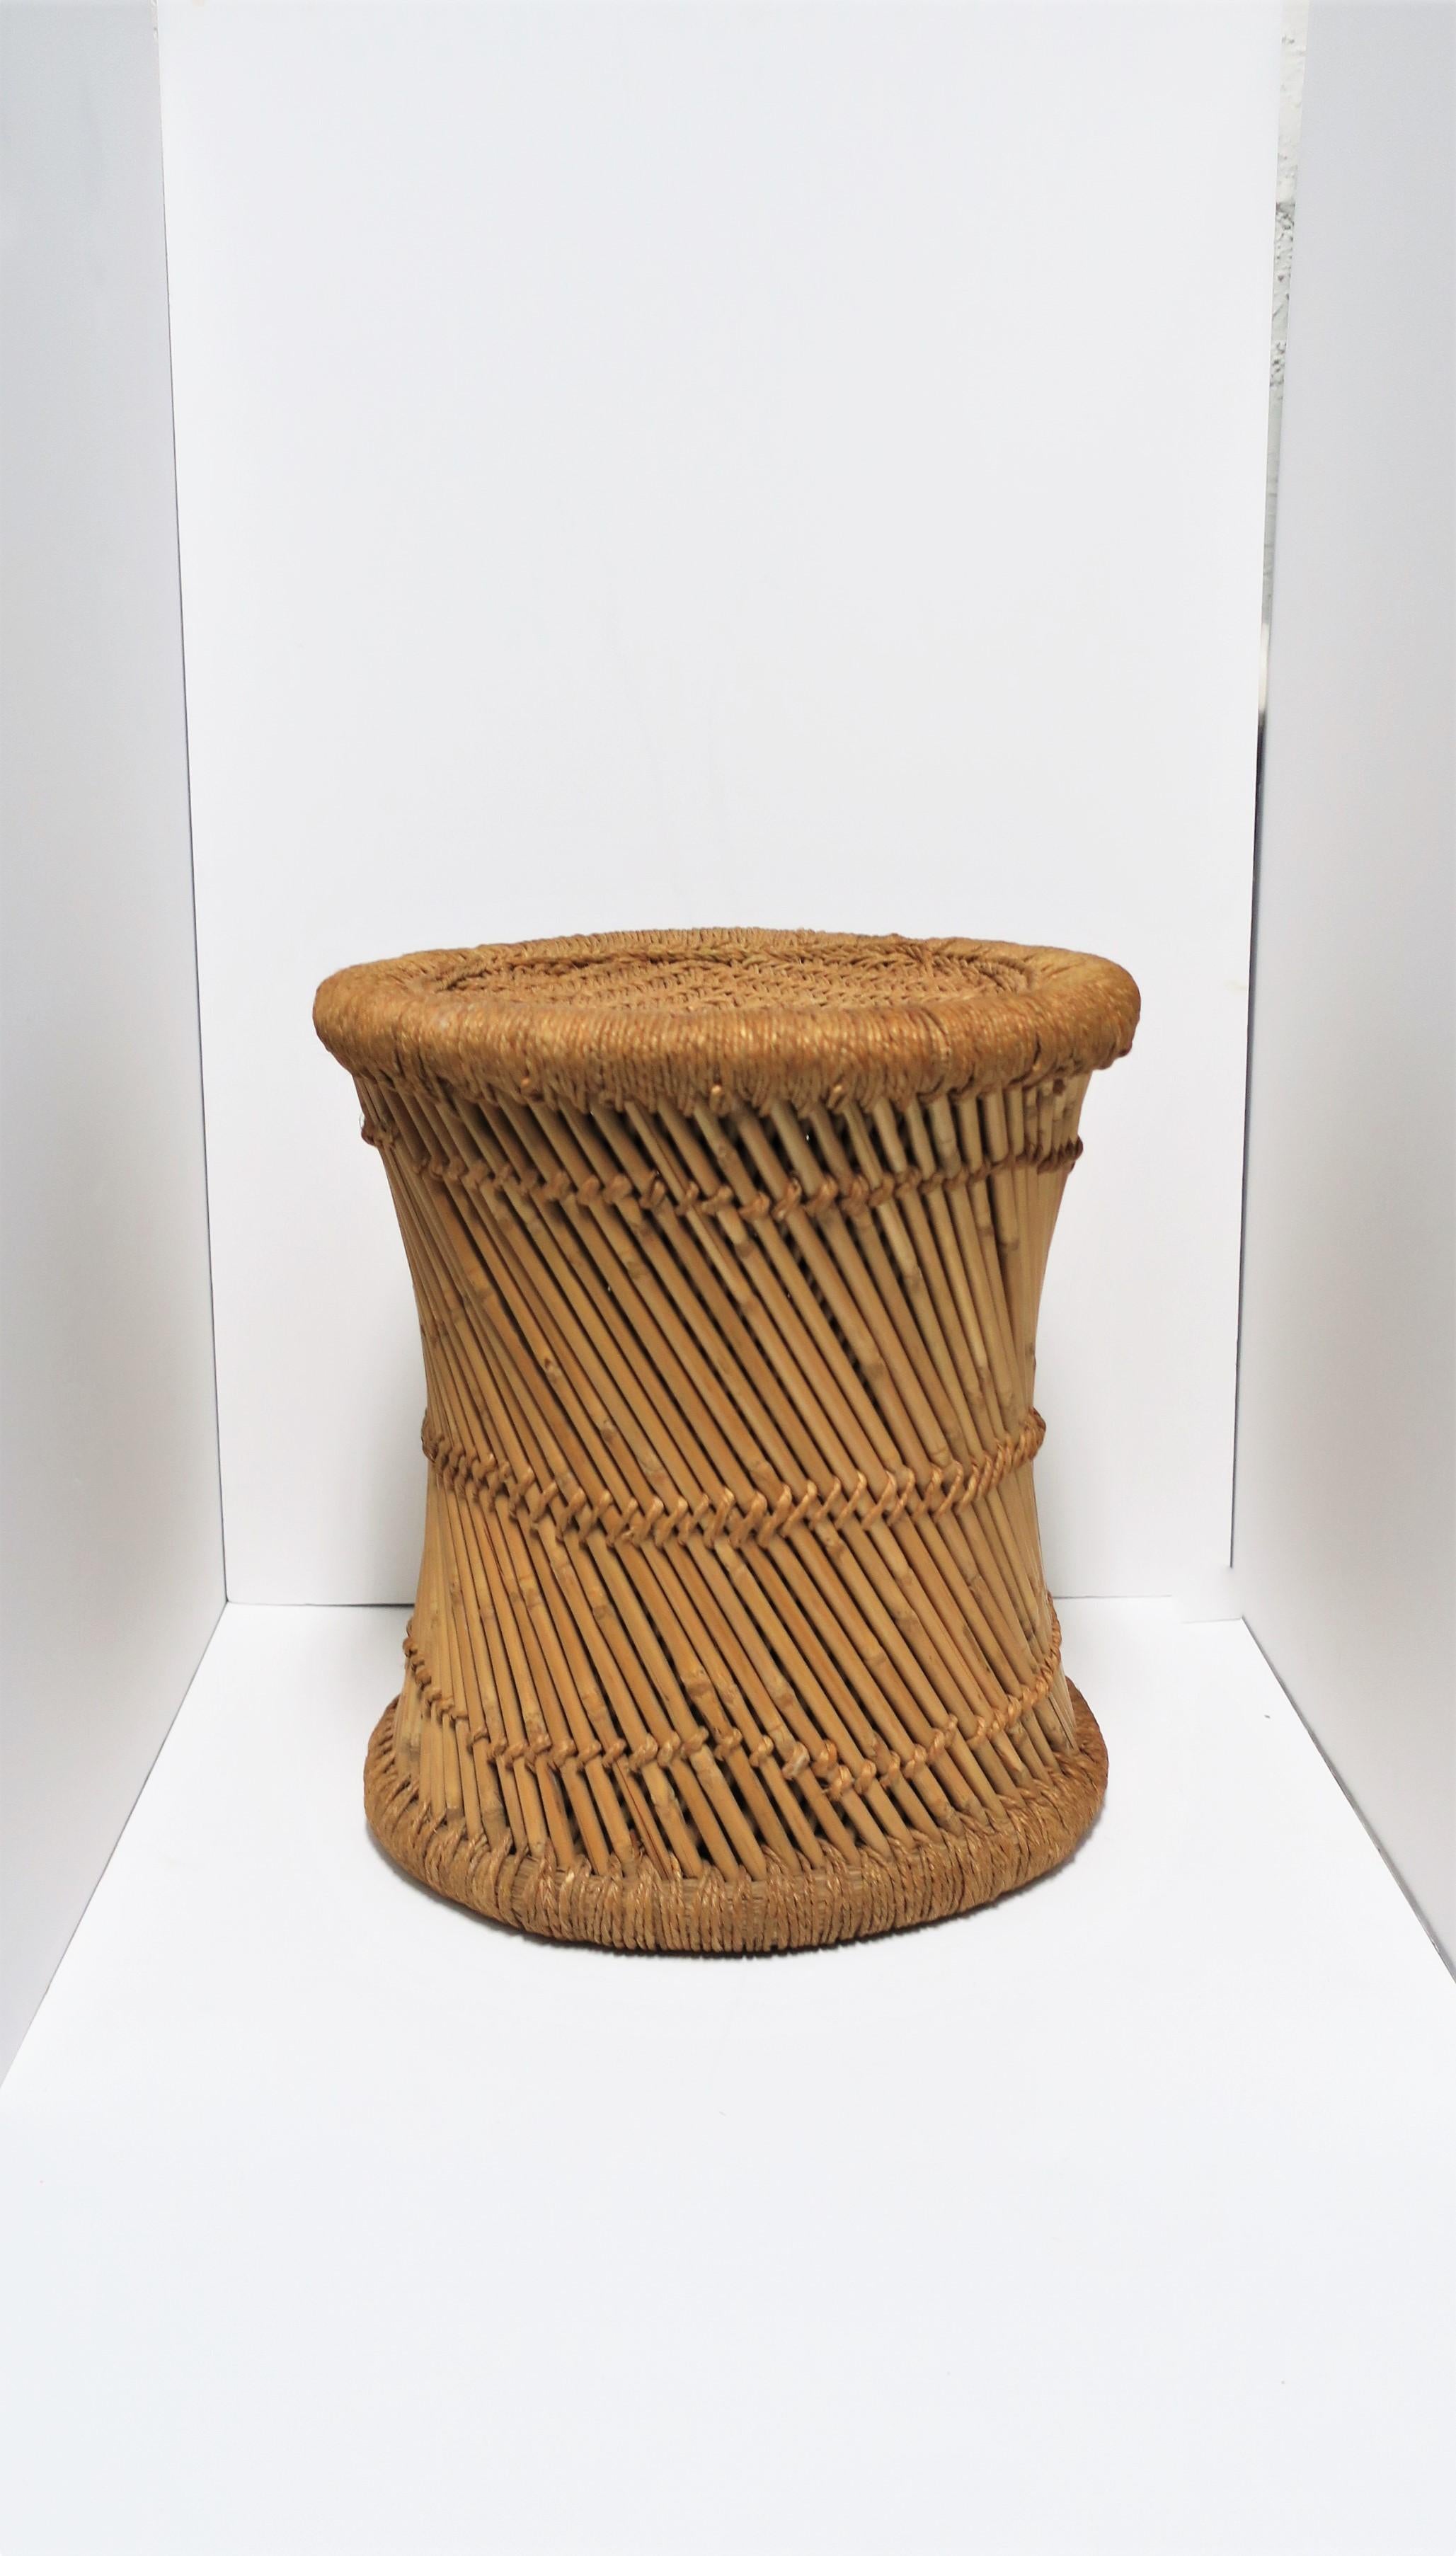 A great vintage wicker pencil reed stool or side table, circa 20th century, India. Stool is sturdy and well made and can support a human being (as intended.) Stool can also double as side table providing there's a stabile environment on top for a